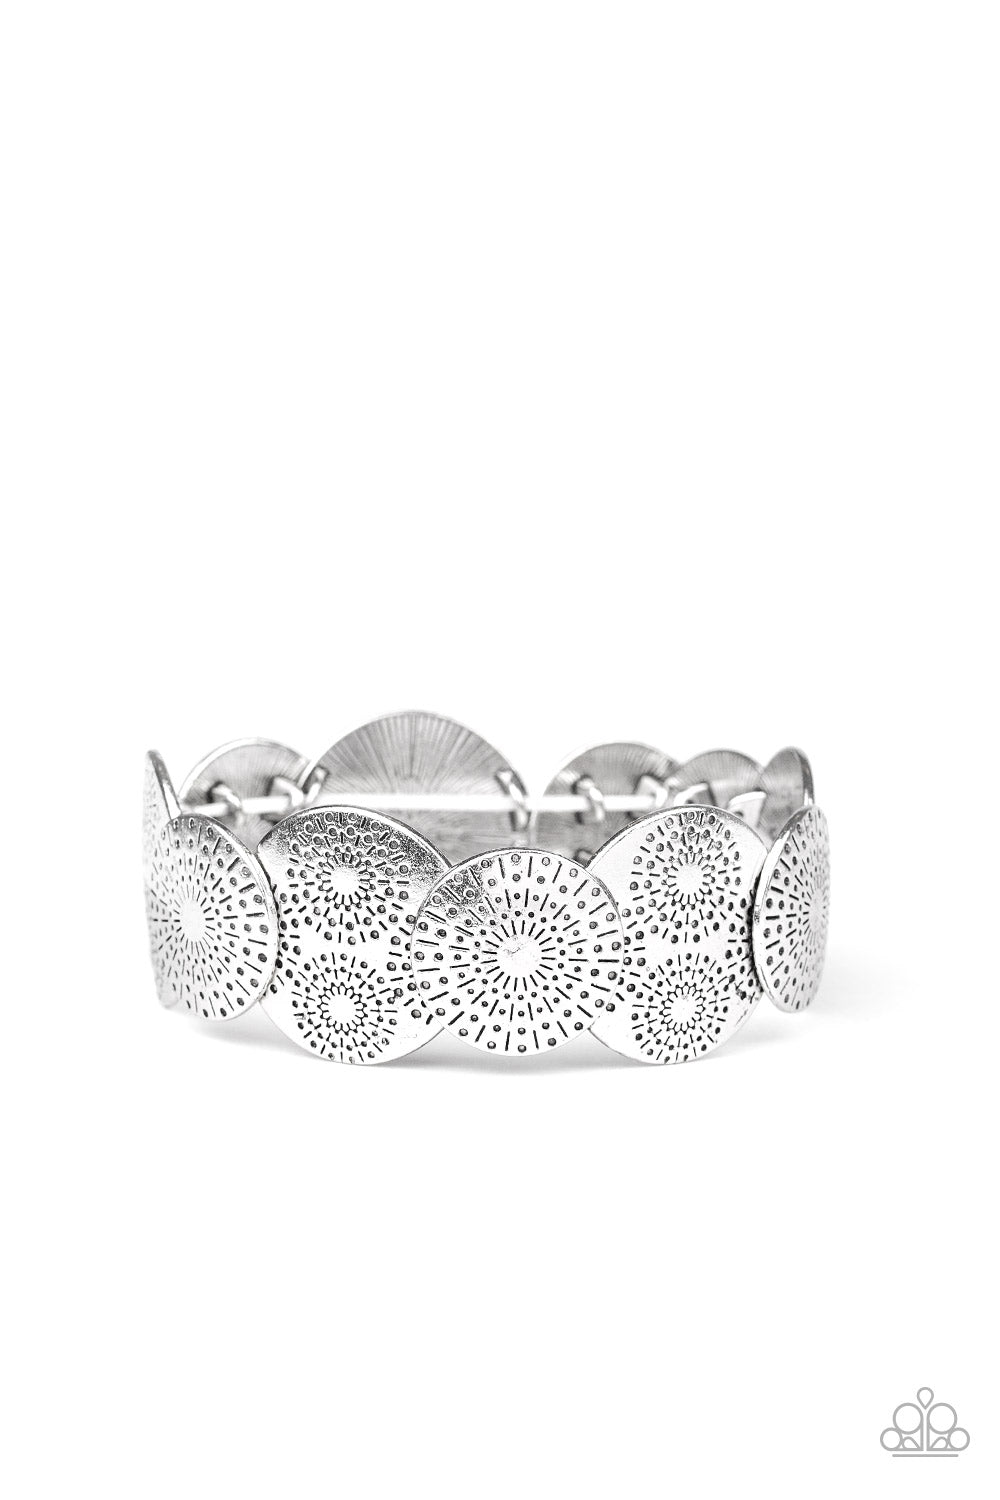 shop-sassy-affordable- pleasantly-posy-silver-paparazzi-accessories